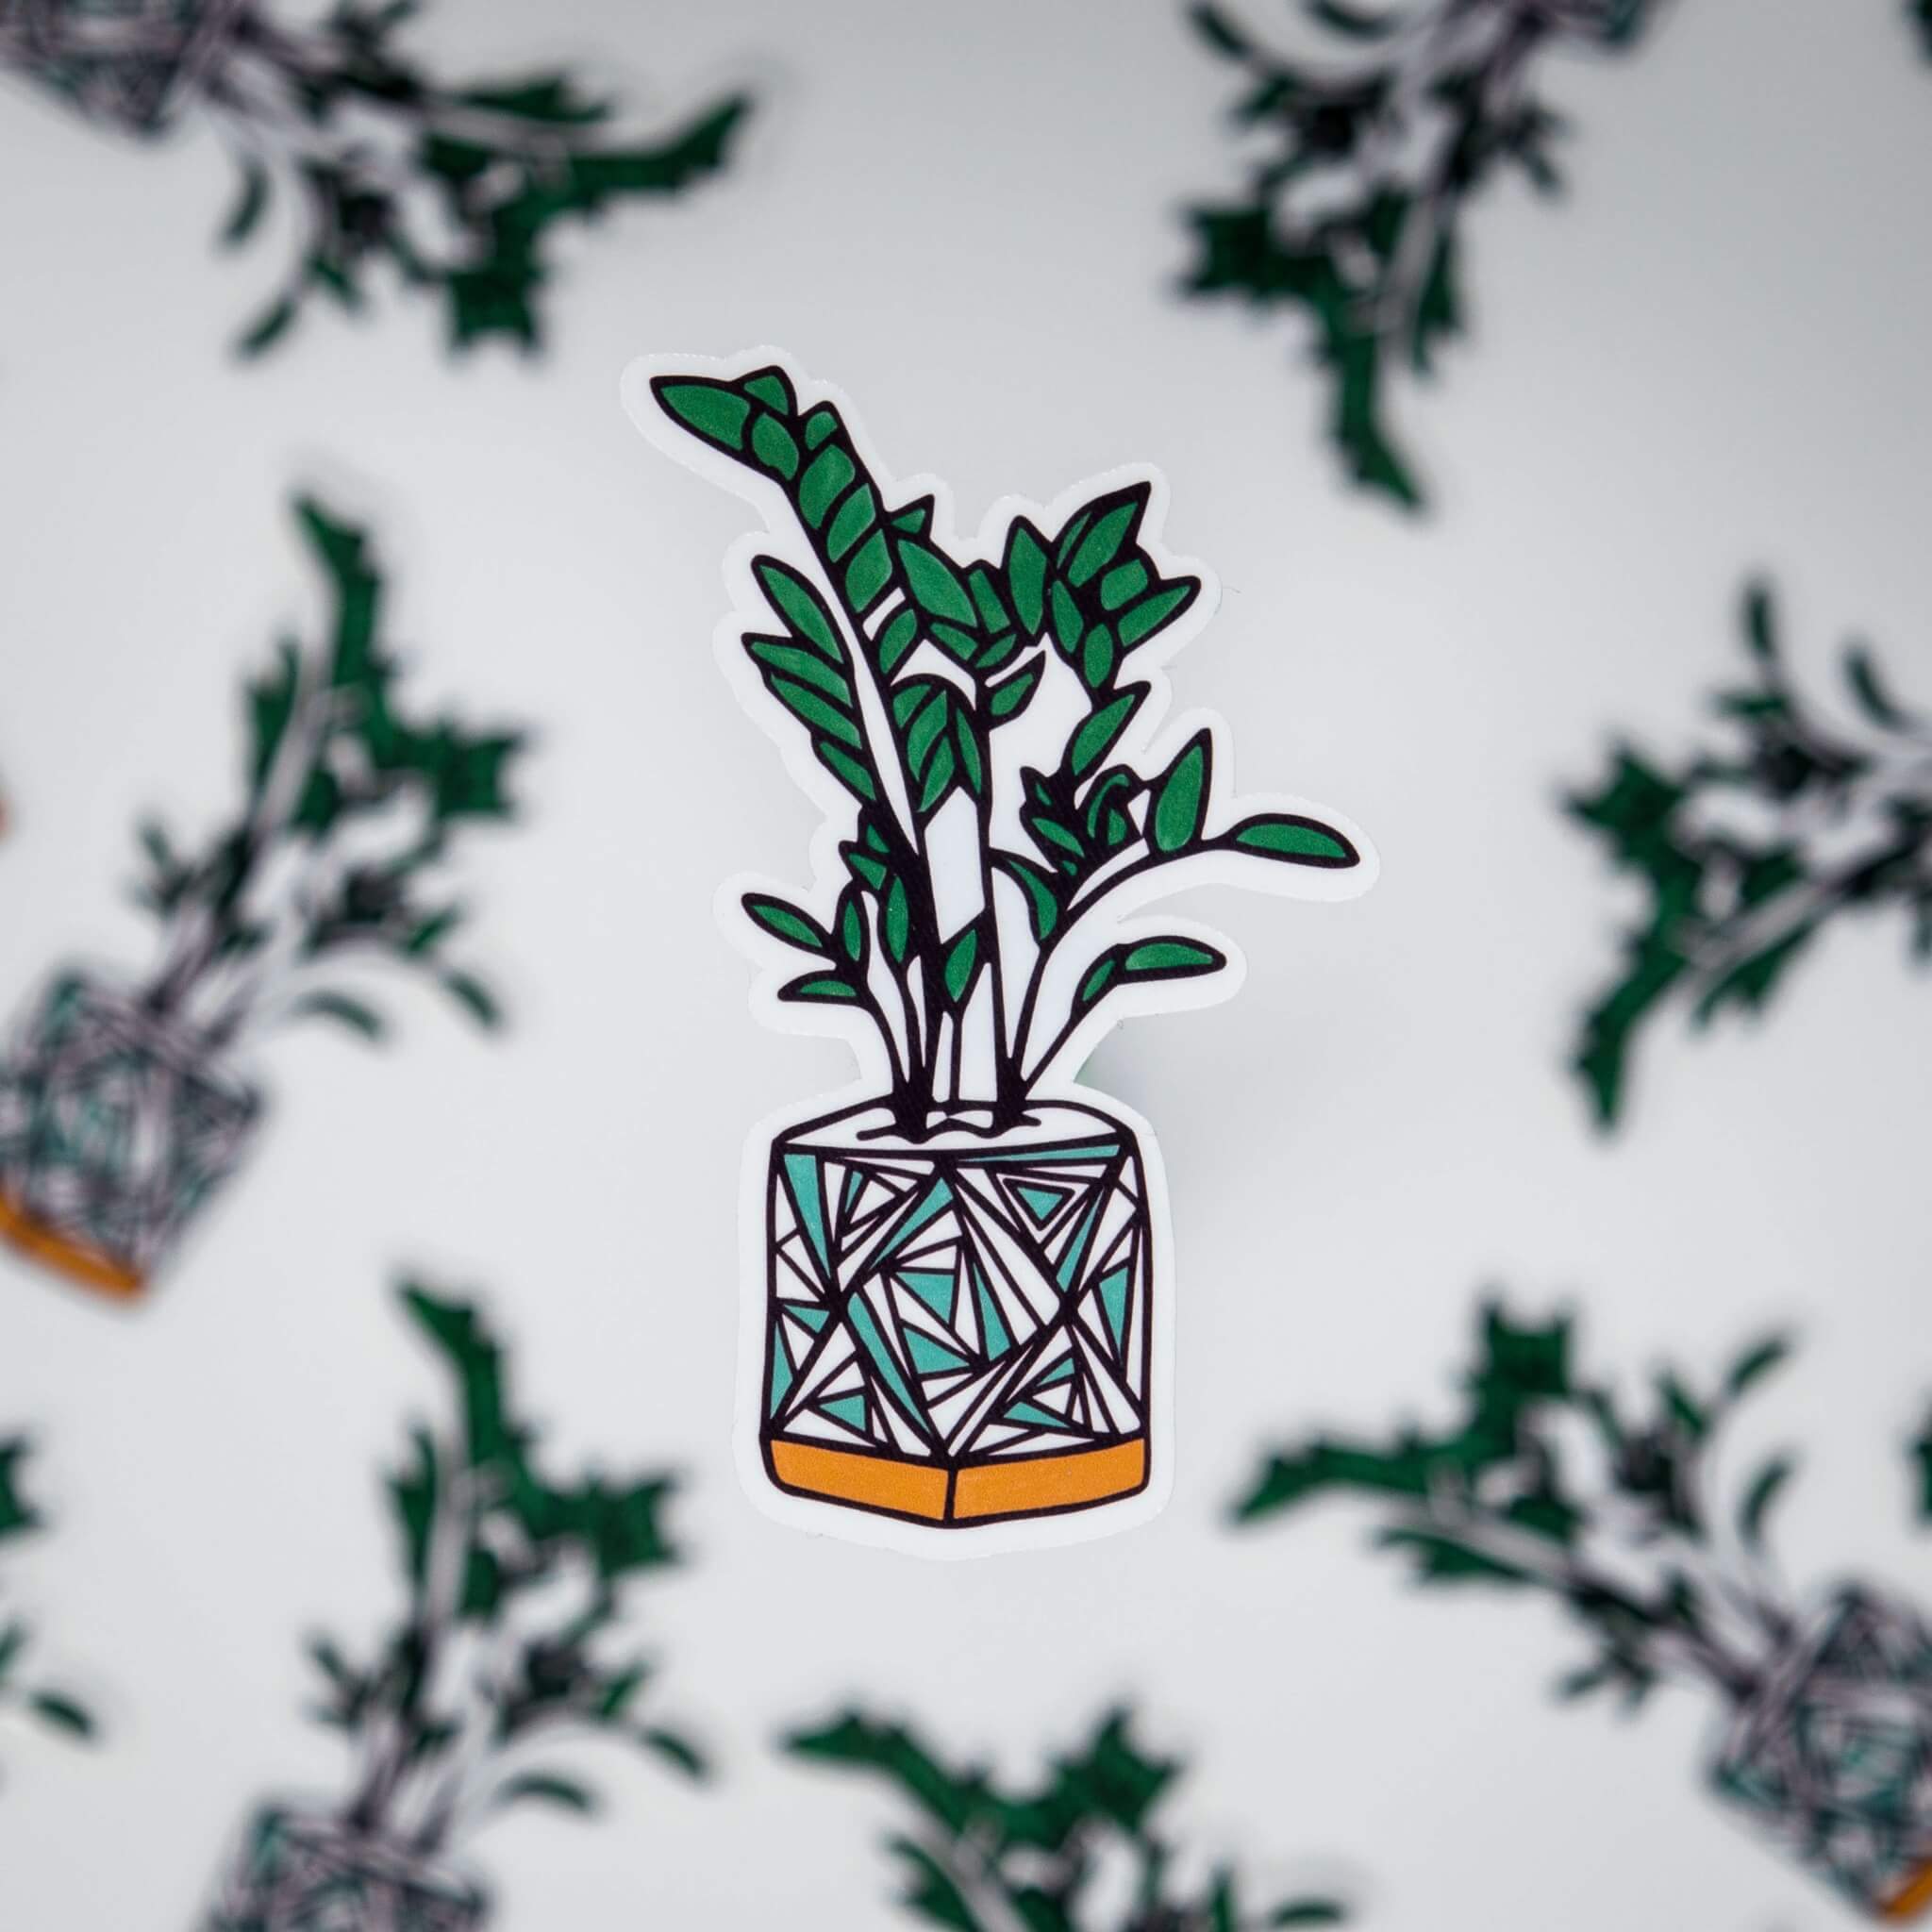 A sticker of a potted plant with a white base and an orange pot. The plant has long, spindly green leaves that are jagged and pointy. The background is a white field with other copies of the plant in the background. - Succulent, sticker